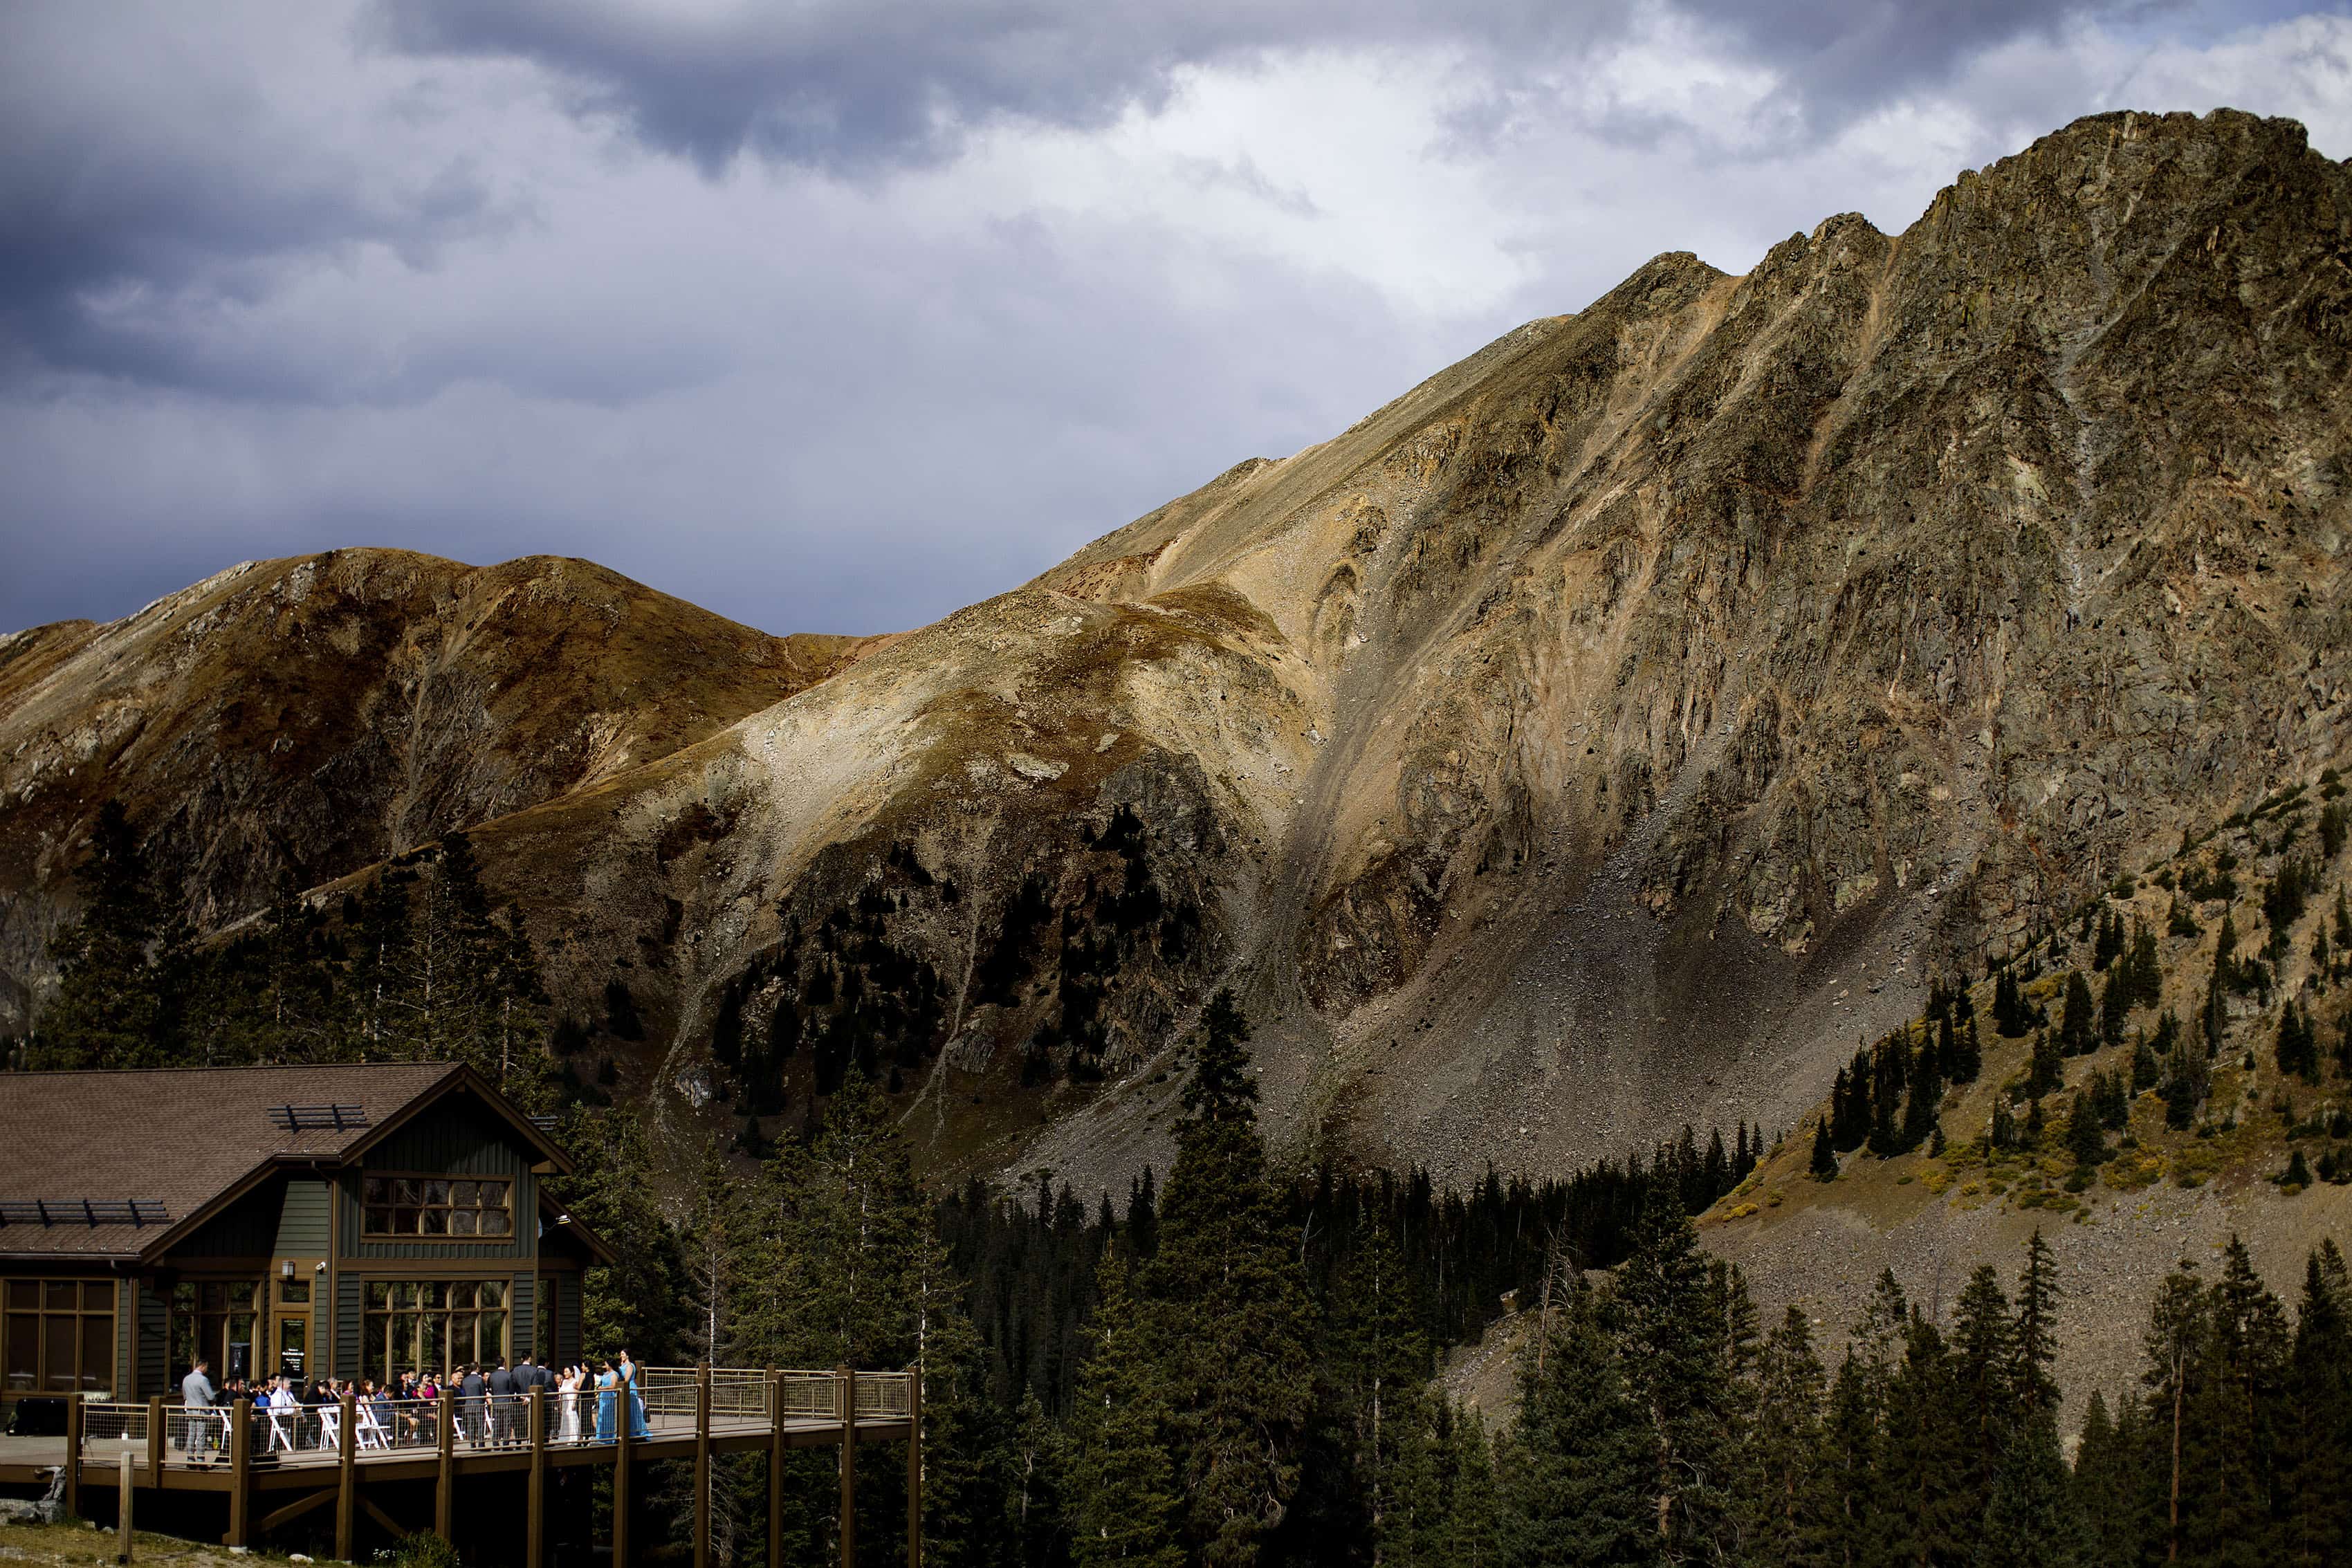 A view of David and Xinya's Arapahoe Basin wedding ceremony at Black Mountain Lodge in Colorado